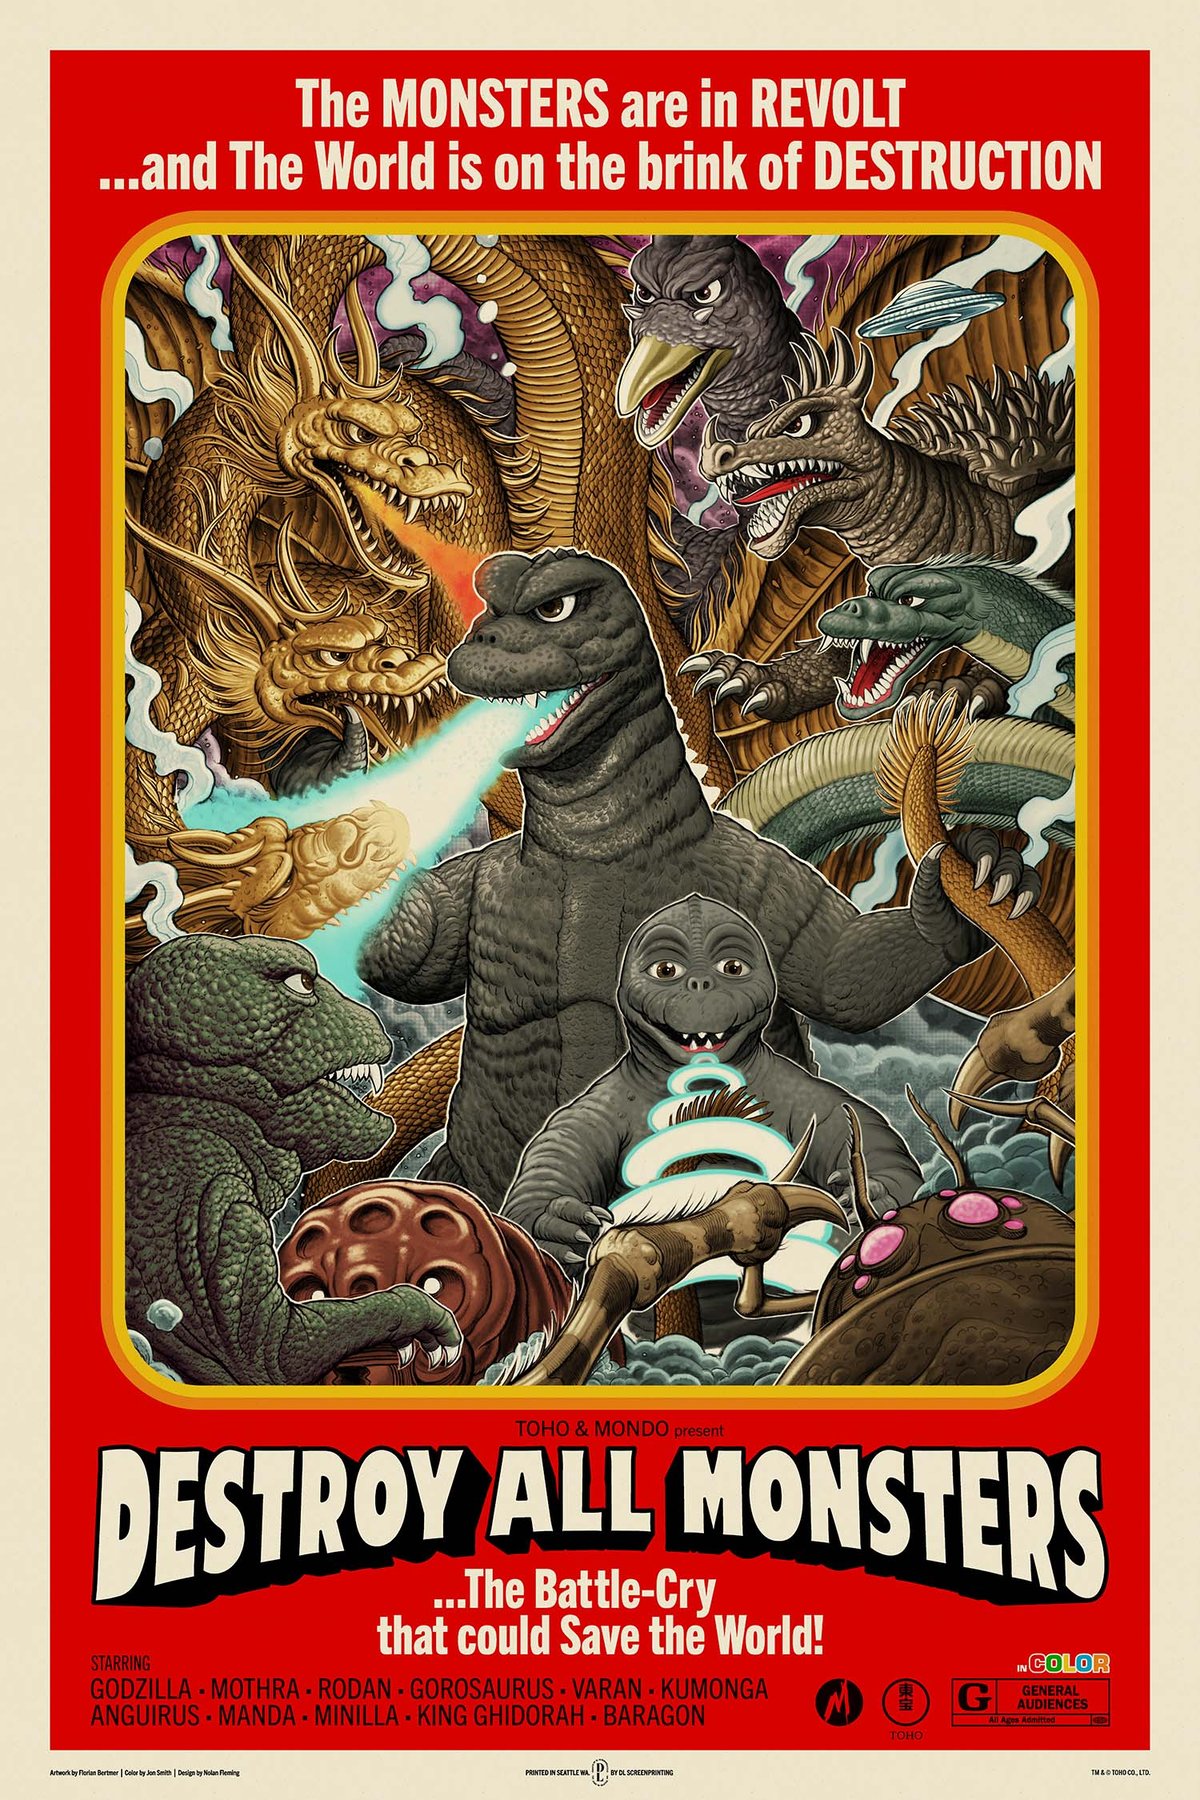 Image of "Destroy all Monsters" Artist Edition Remarqued